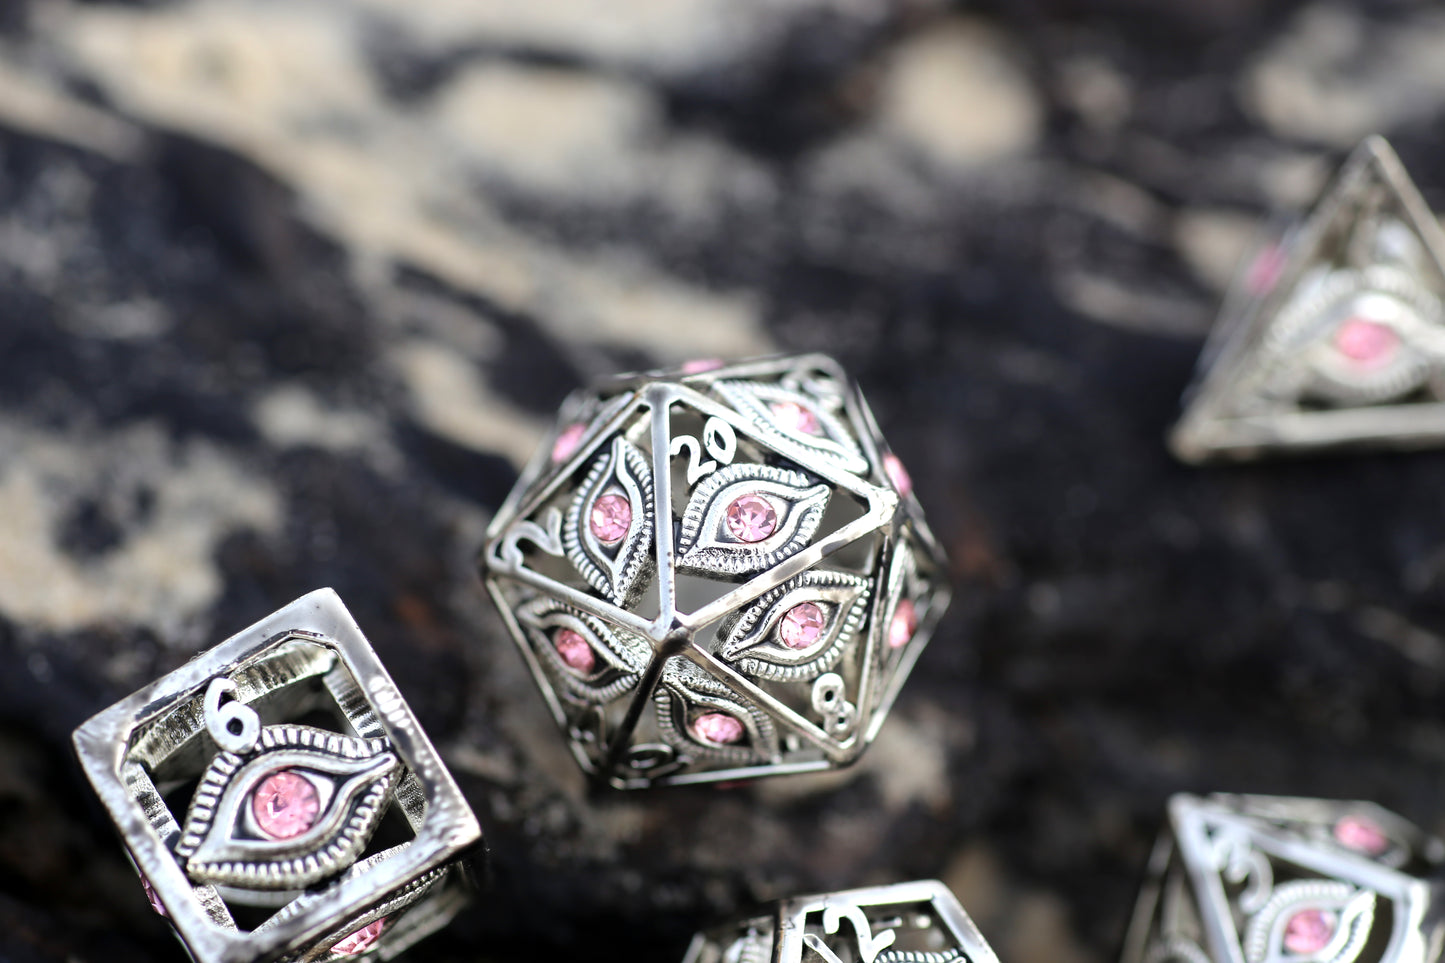 Shiny Silver with Pink Gems Dragon's Eye Hollow Metal Dice set